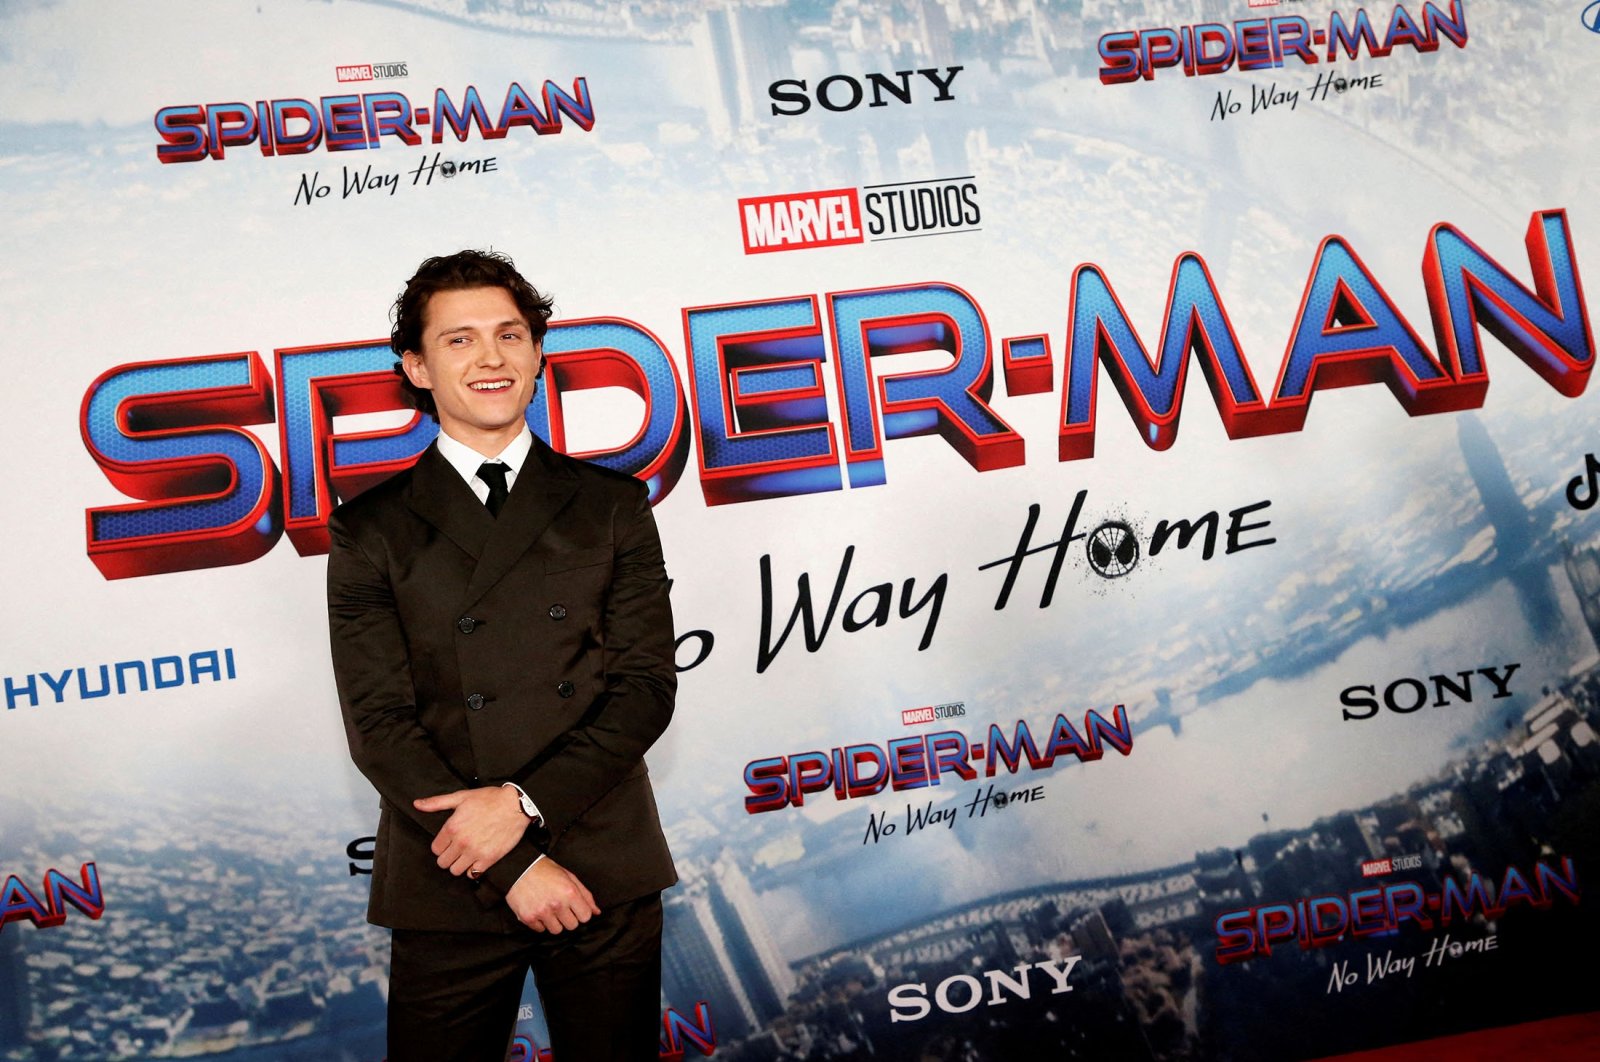 Tom Holland attends the premiere for the film “Spider-Man: No Way Home” in Los Angeles, California, U.S., Dec. 13, 2021. (Reuters Photo)